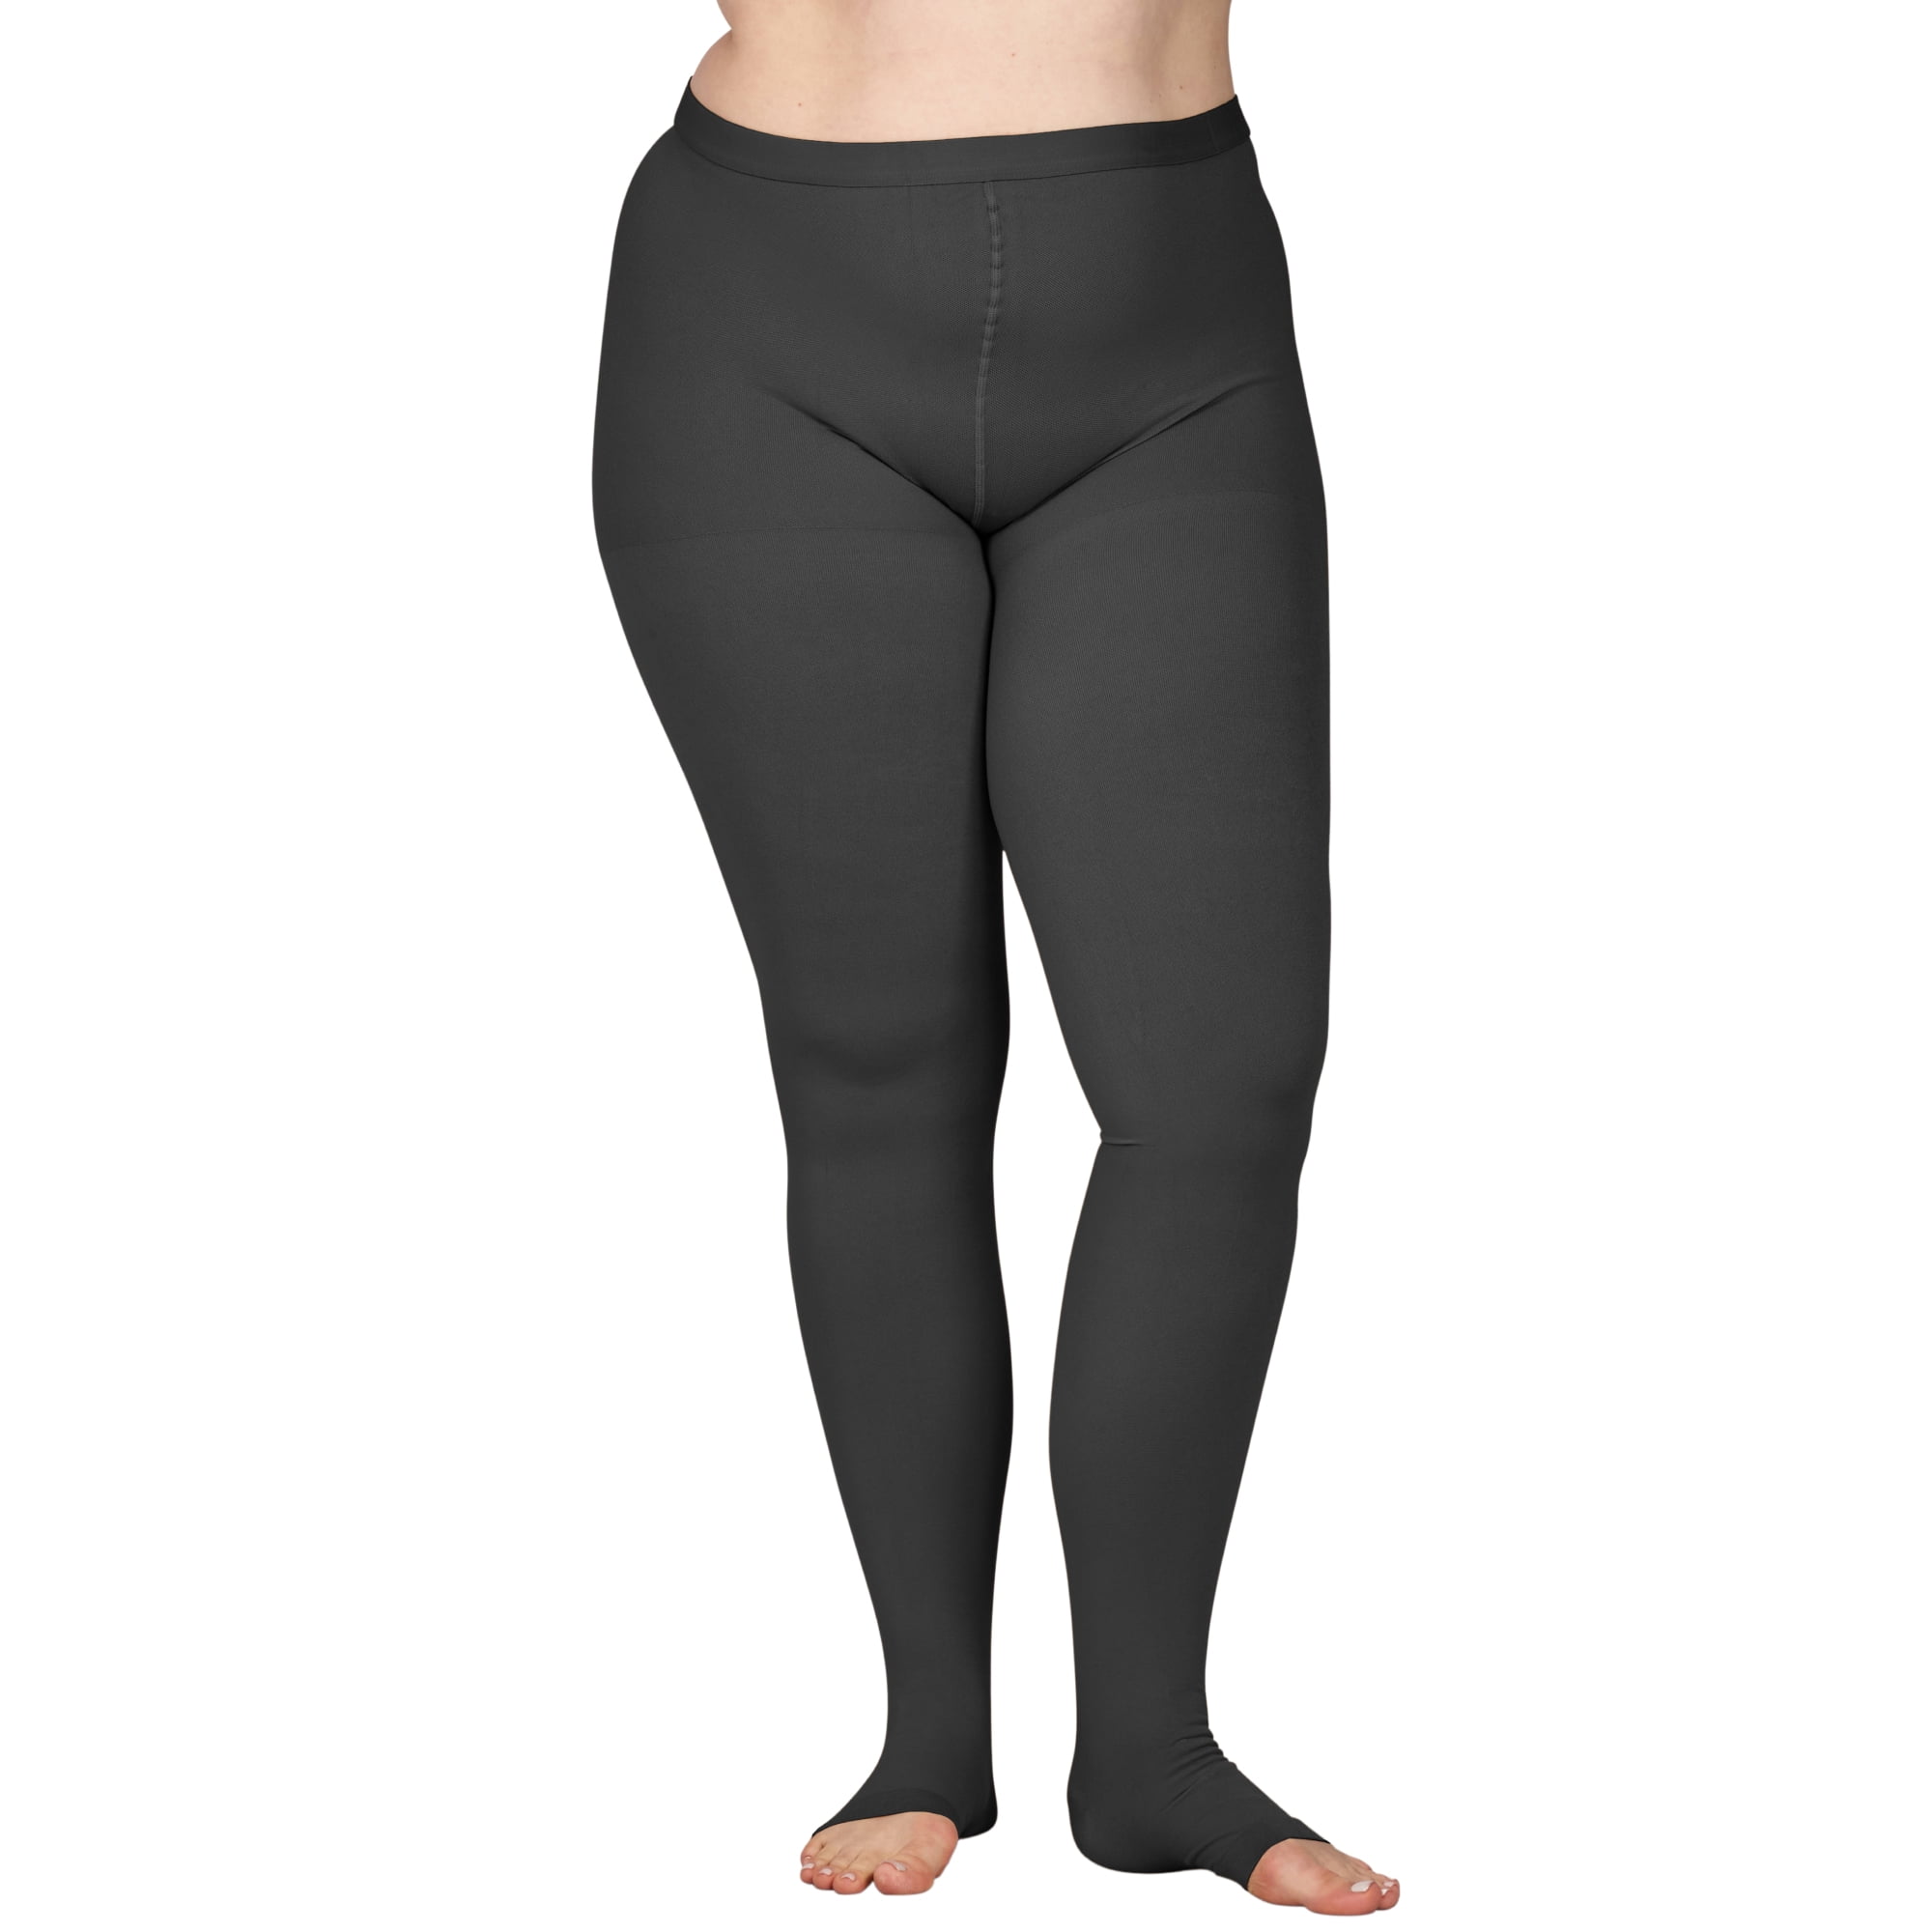 Prevent Varicose Veins Plus Size Sexy Lose Weight Compression Tights  Pantyhose Women Girl meia calca collant Retail Color: Black-Calf sleeve,  Size: M